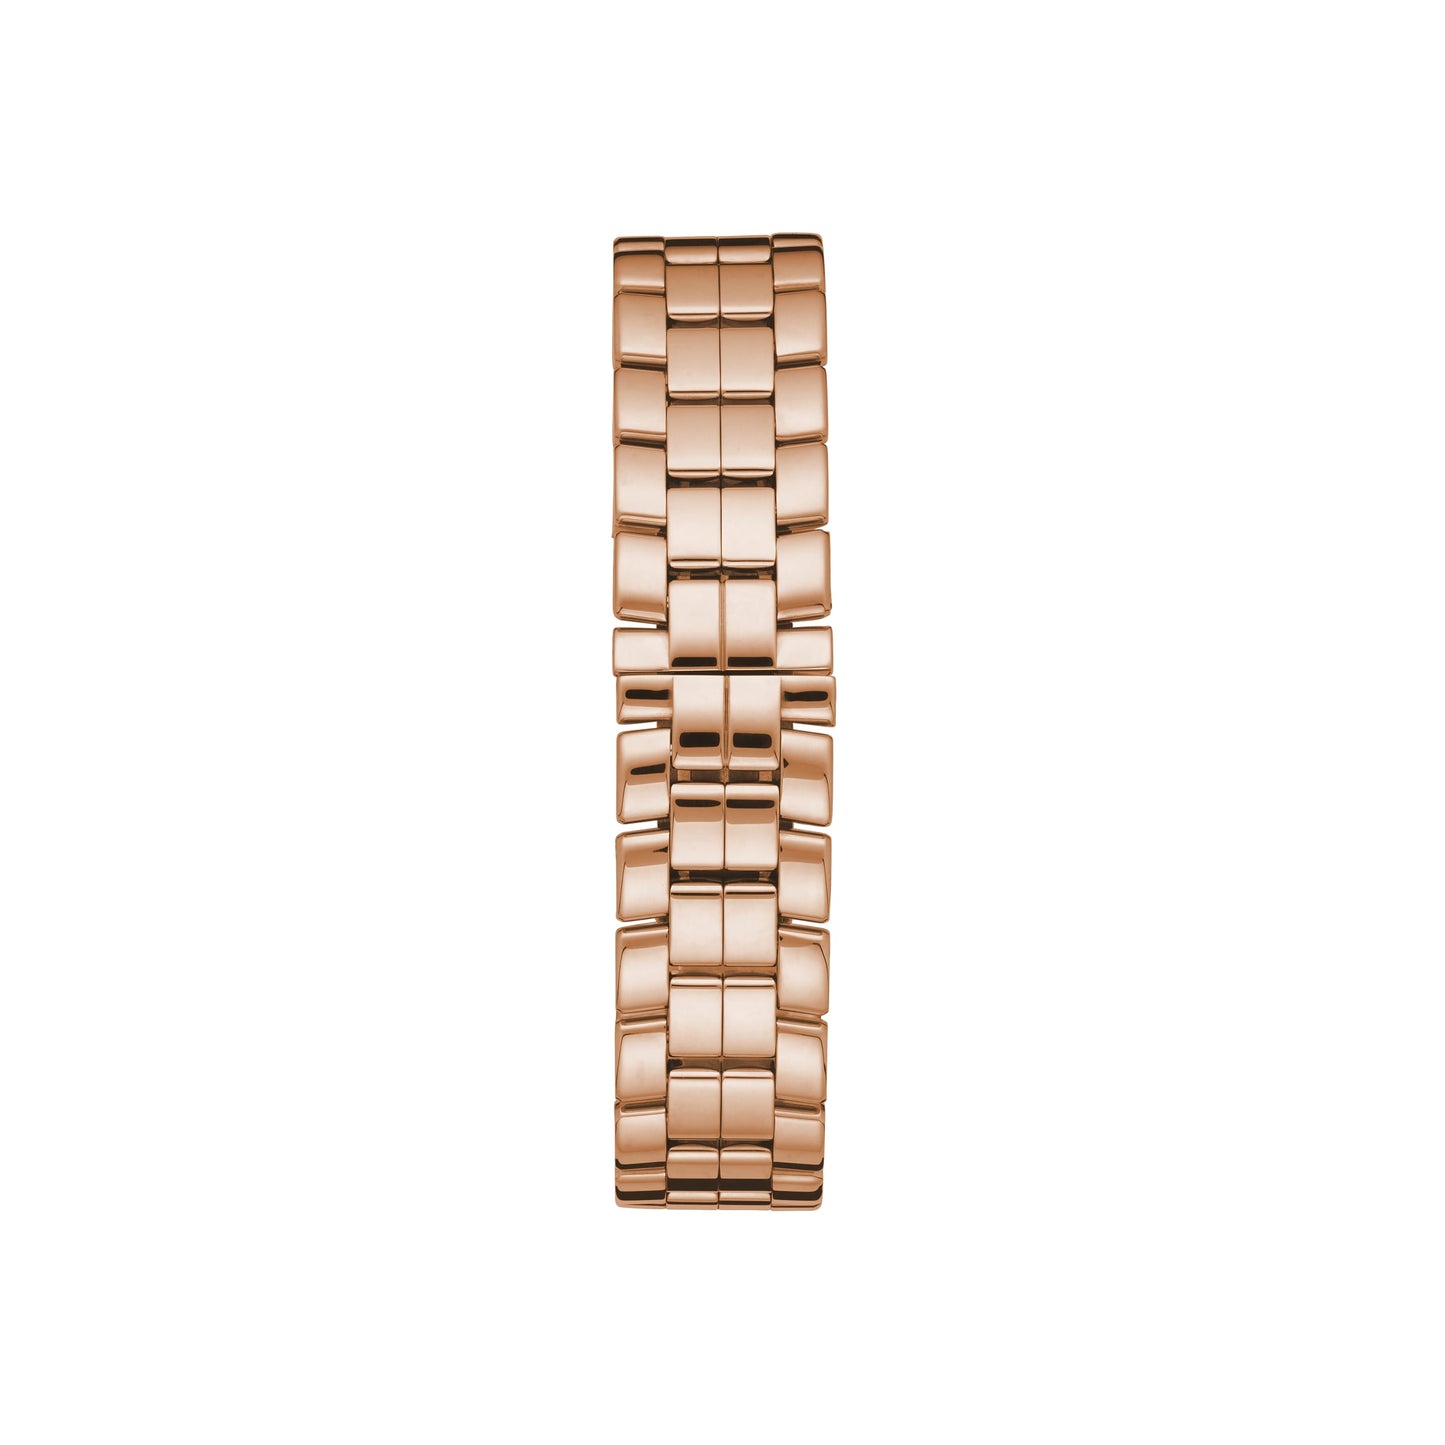 HAPPY SPORT 30 MM, AUTOMATIC, ETHICAL ROSE GOLD, DIAMONDS 274893-5014